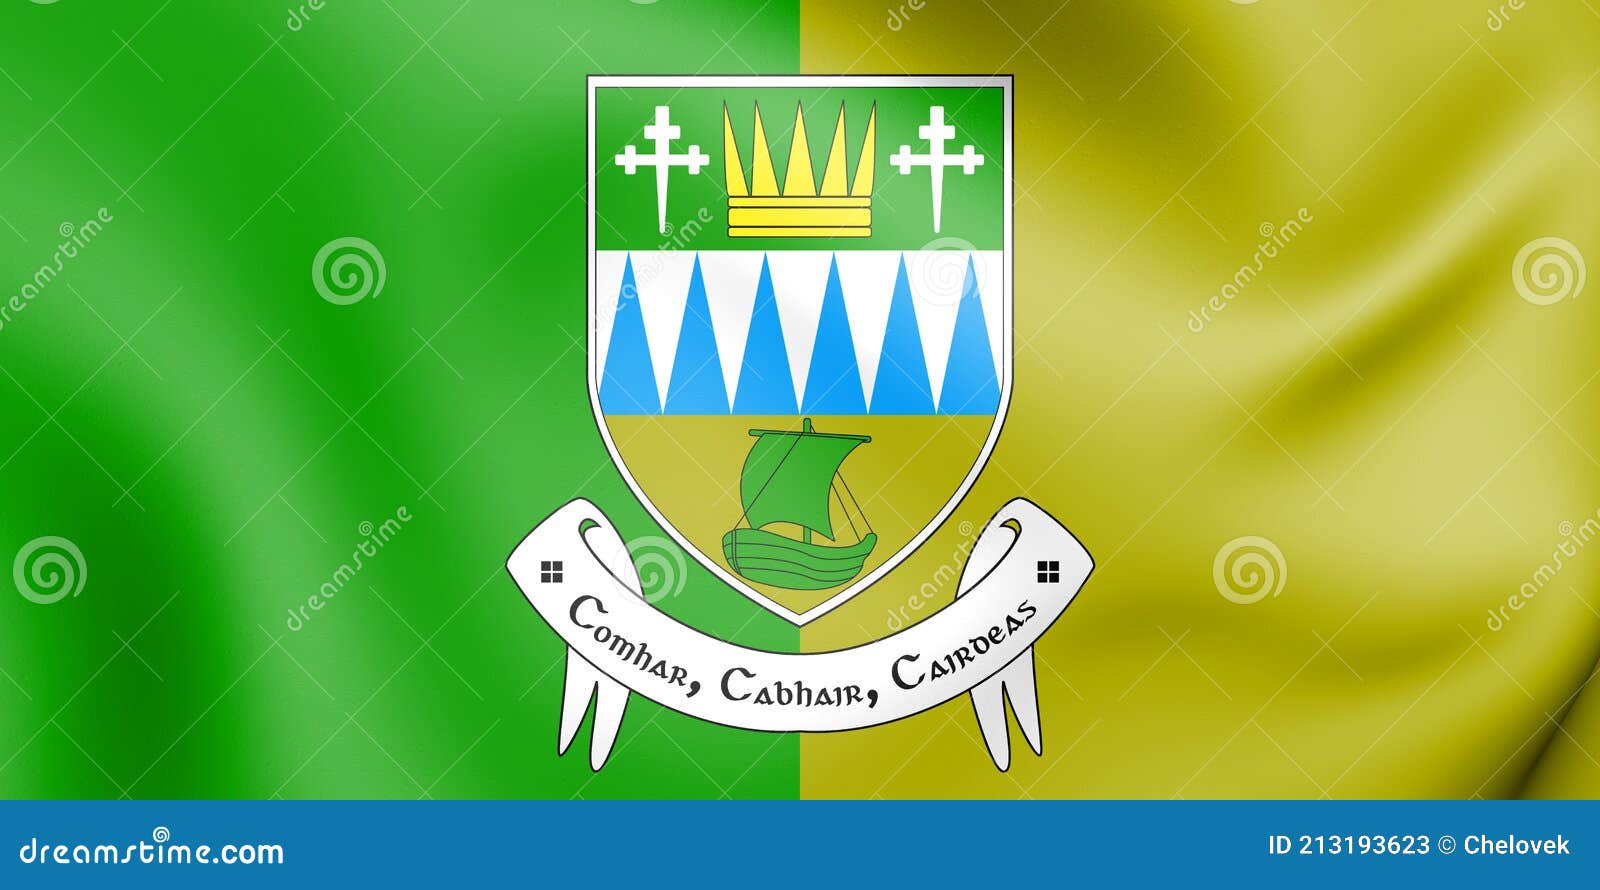 3d flag of kerry county, ireland.